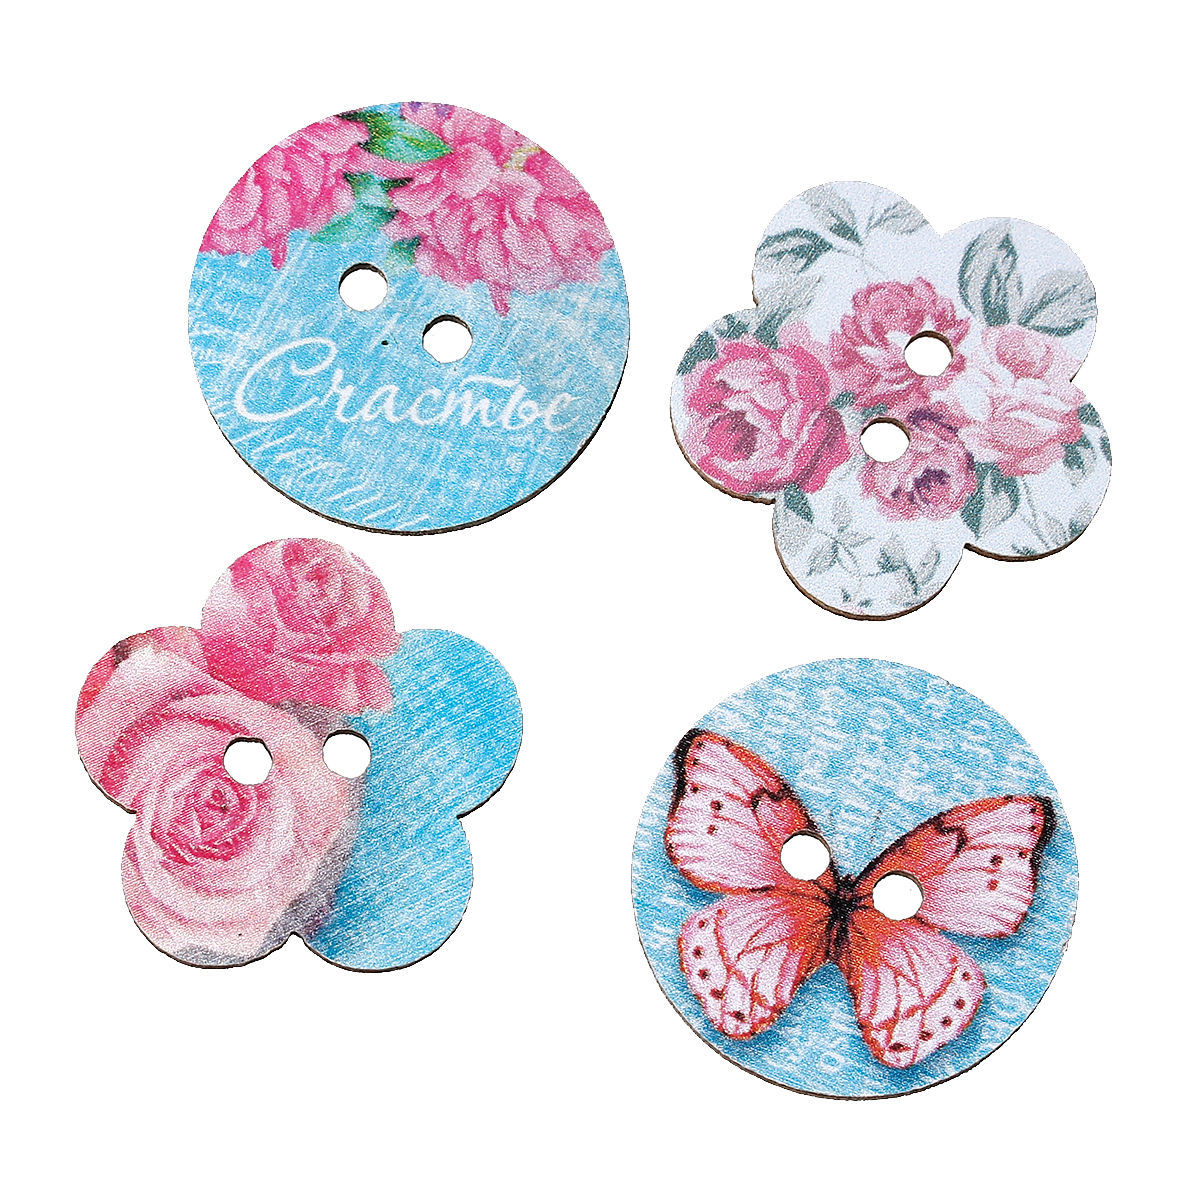 Picture of Wood Sewing Buttons Scrapbooking At Random 2 Holes Butterfly Pattern 25mm x24mm(1" x1") - 24mm(1") Dia, 6 PCs